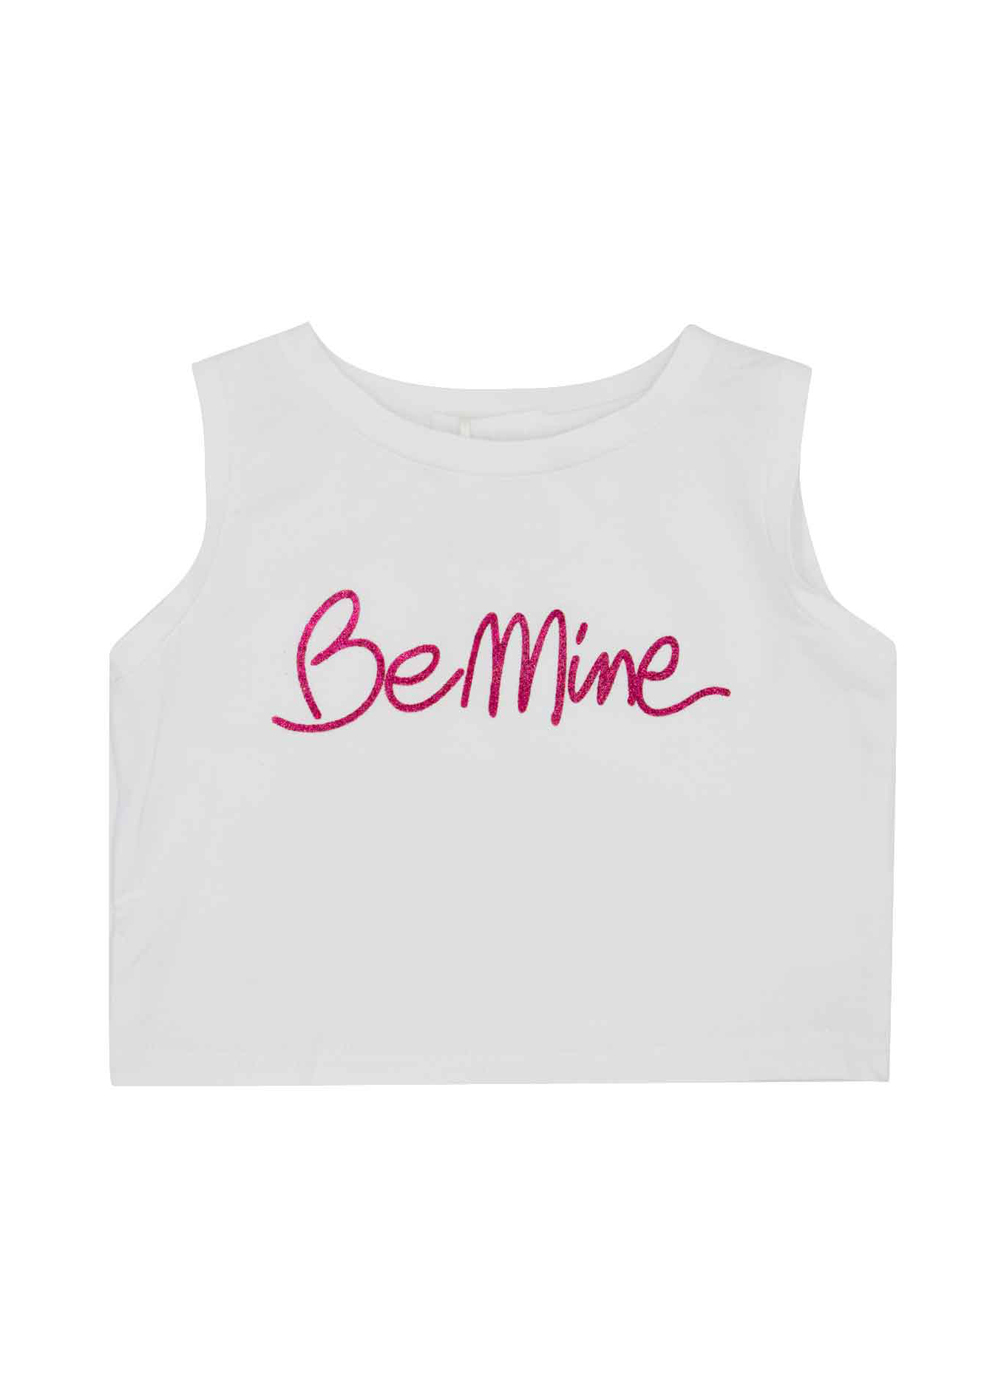 Featured image for “FUN&FUN T-SHIRT "BE MINE"”